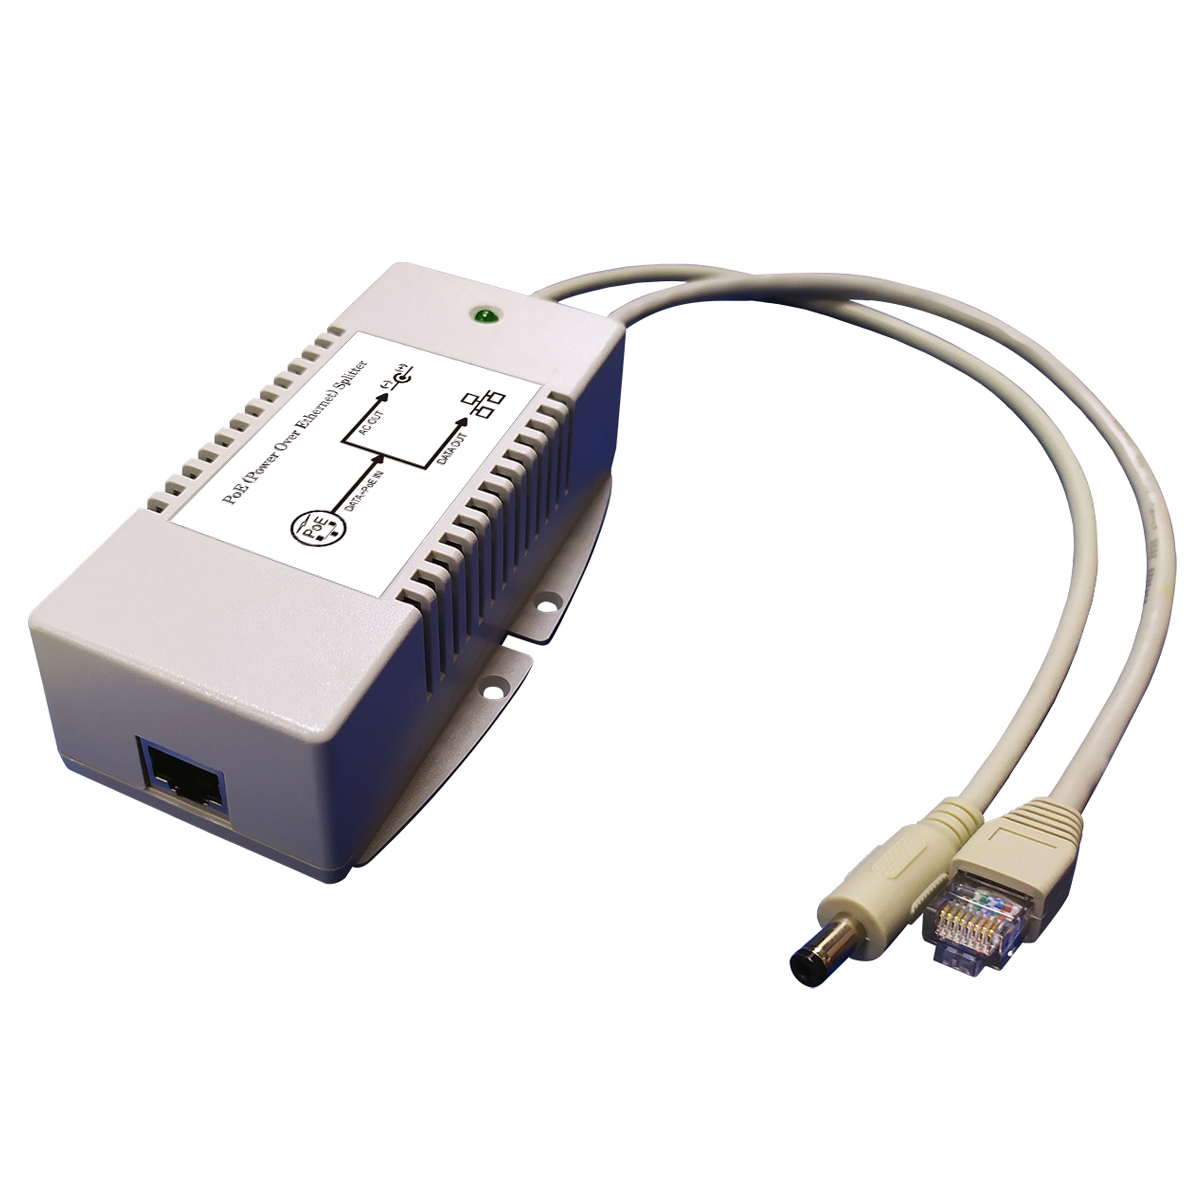 High-power PoE Splitter with 24V DC/40W Output, 87% High Efficiency and 802.3af/at Compliant